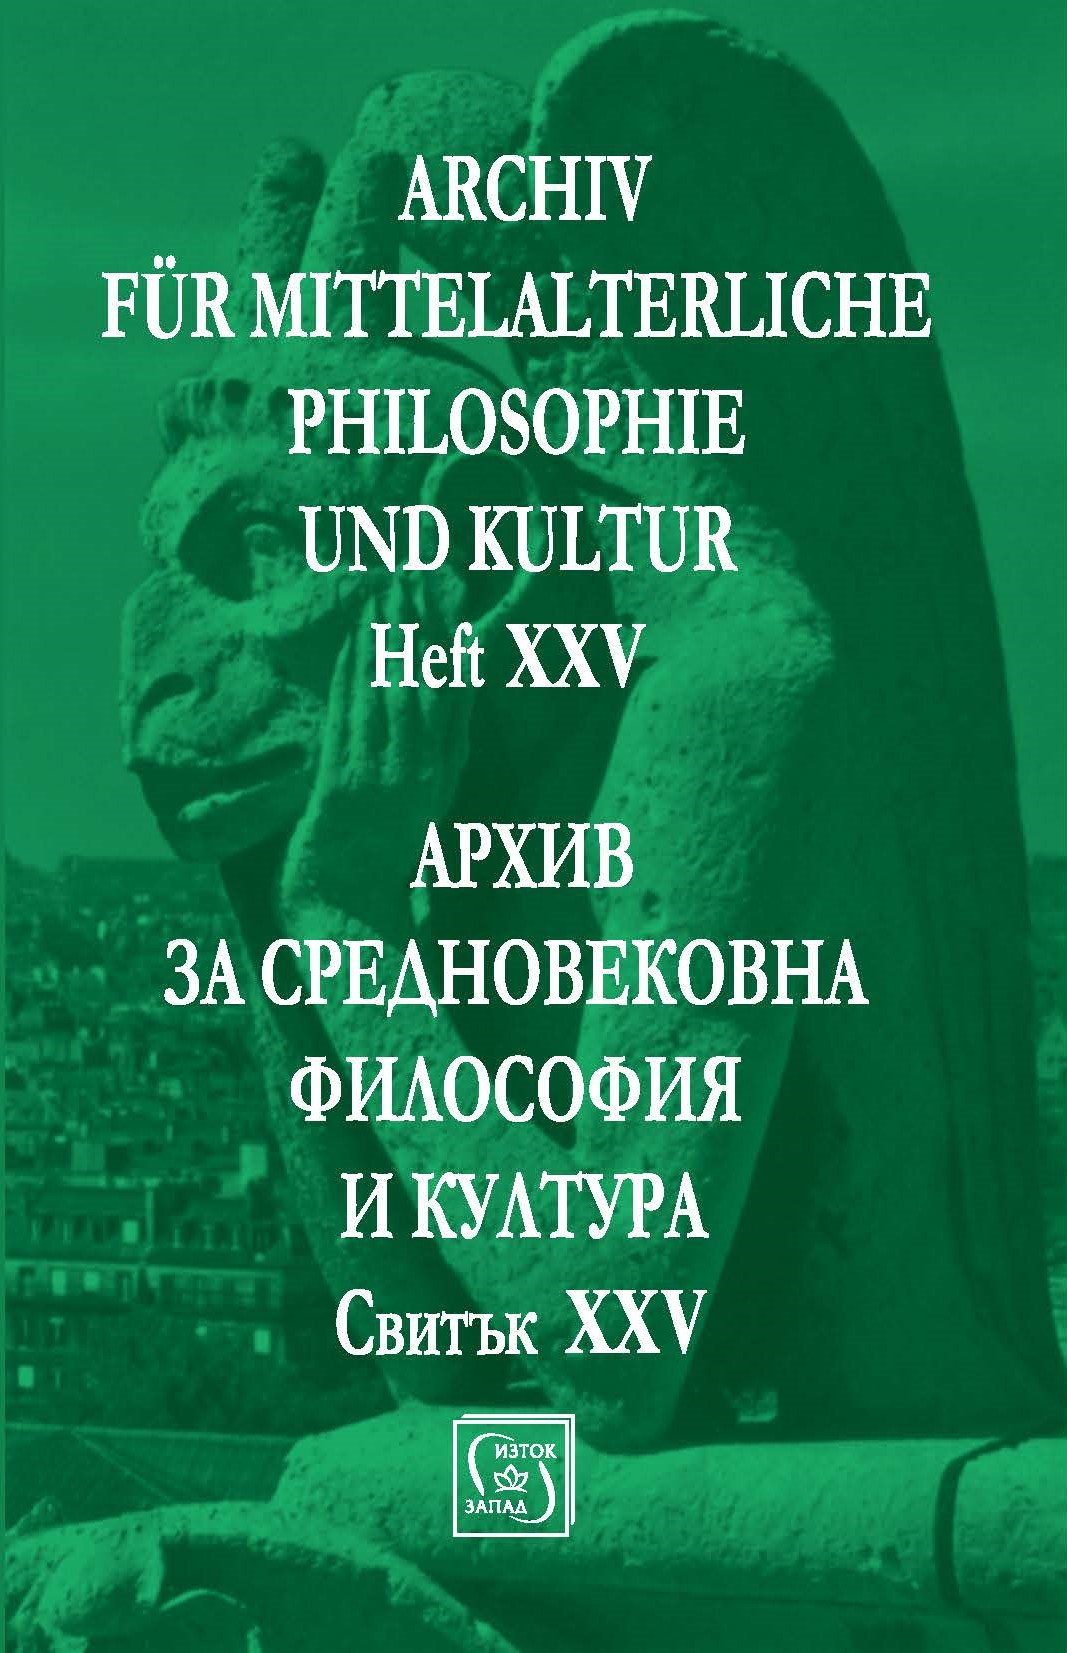 Archive for Medieval Philosophy and Culture
(Contents of Scrolls I – XXV). Cover Image